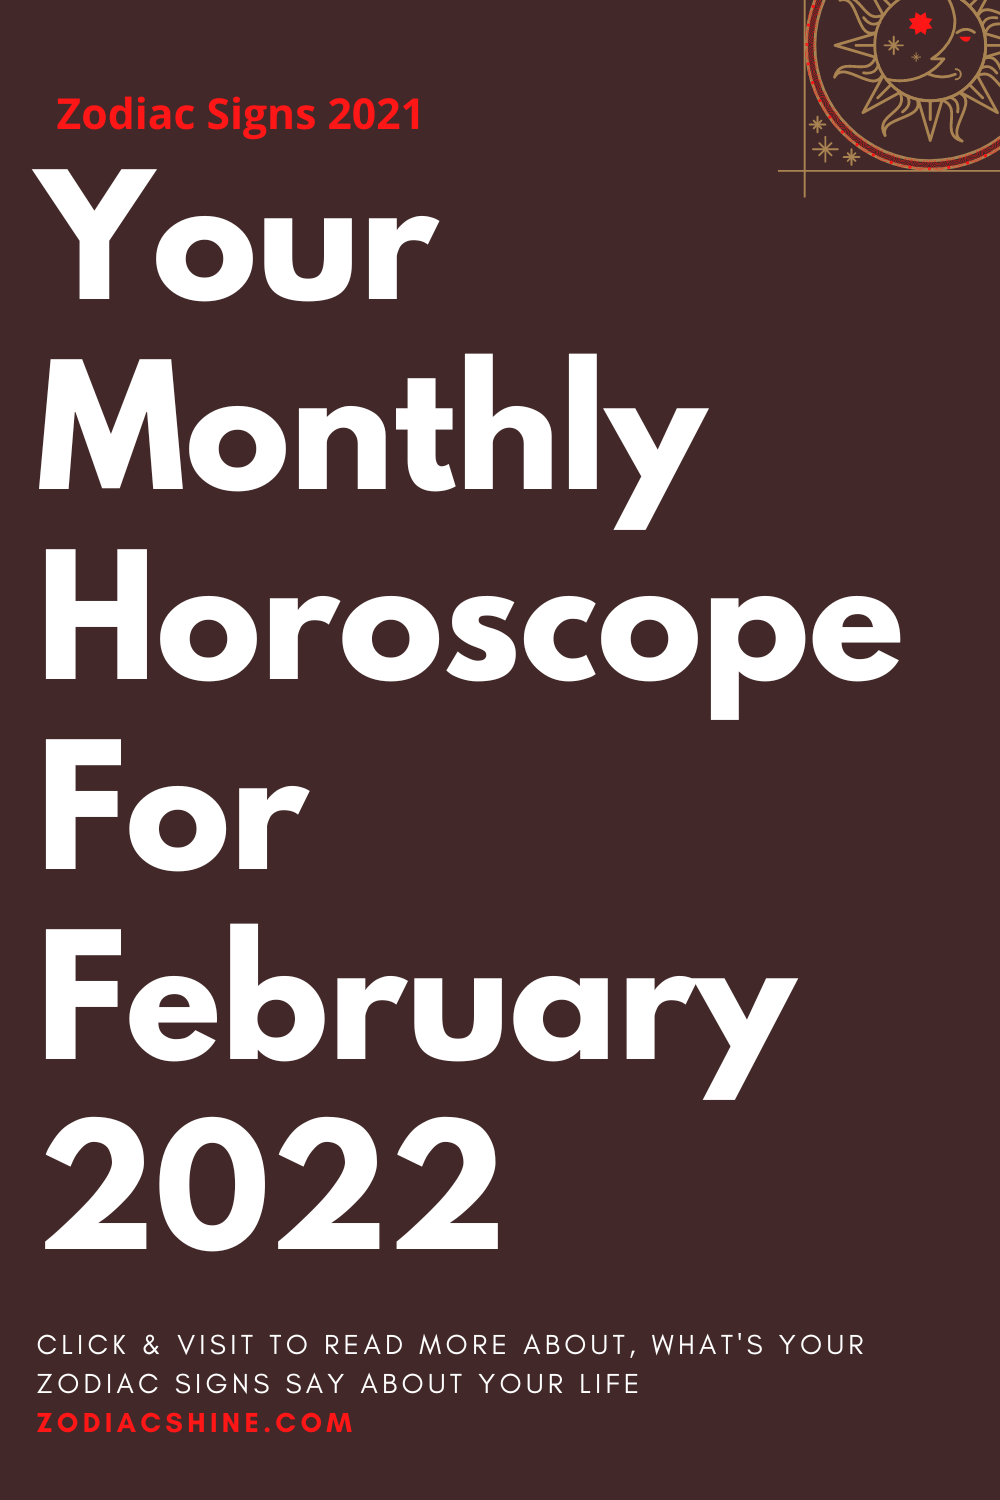 Your Monthly Horoscope For February 2022